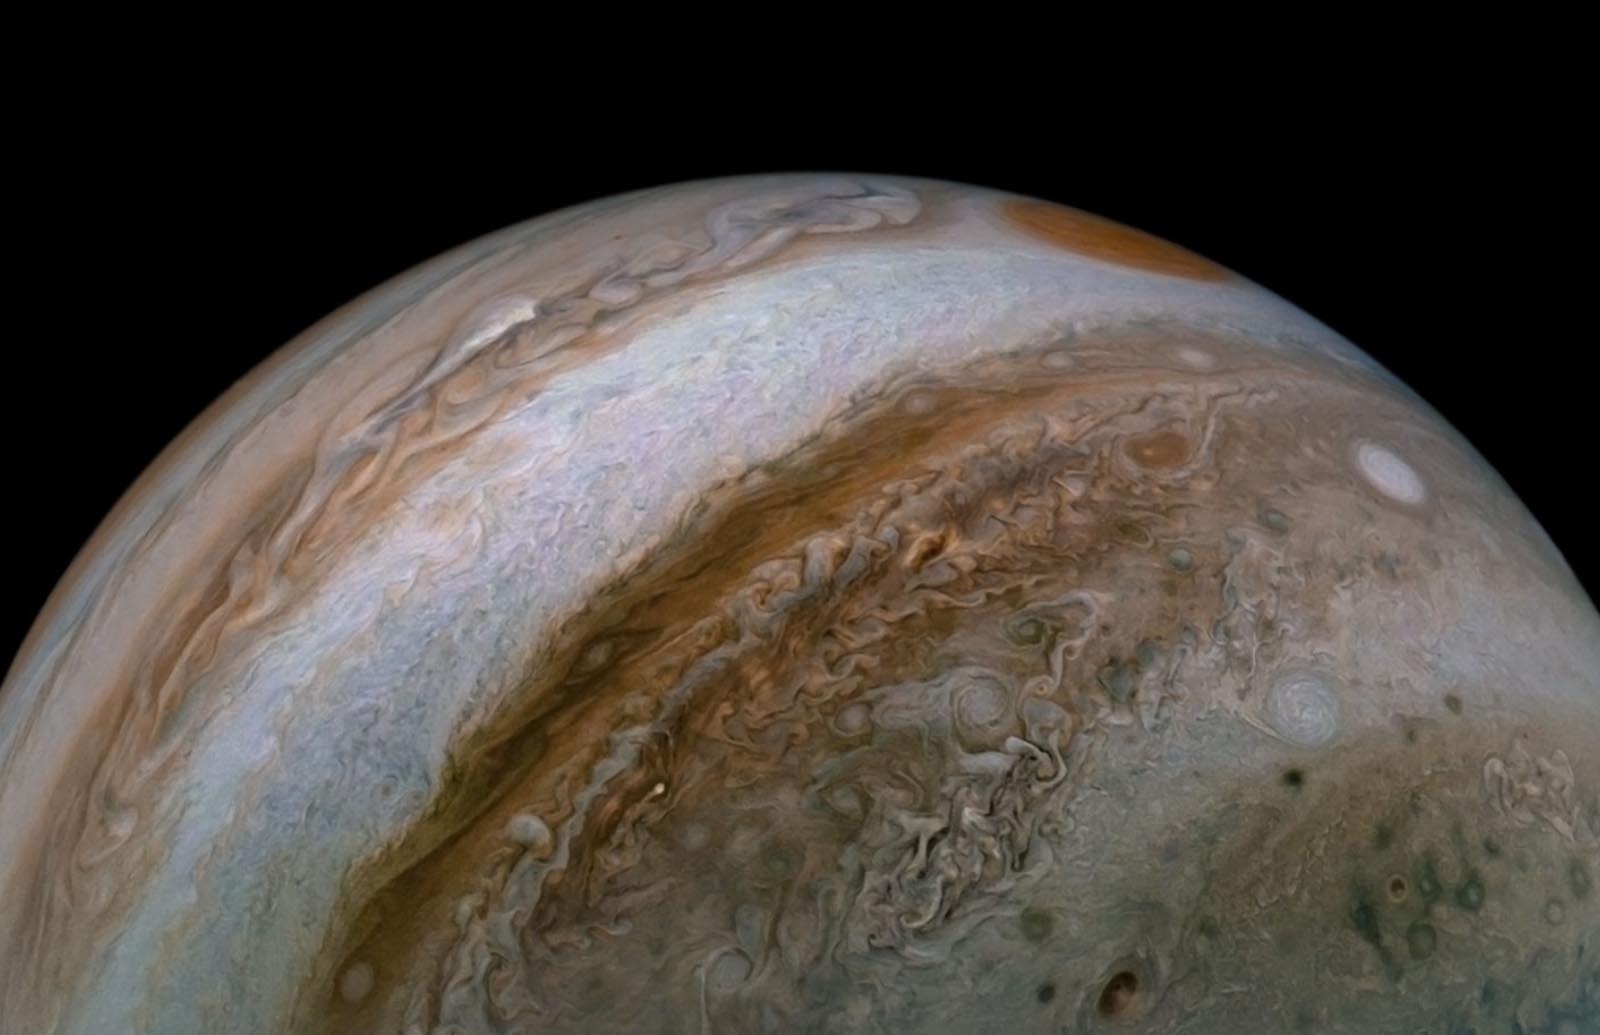 Jupiter may have eaten other planets to grow so large